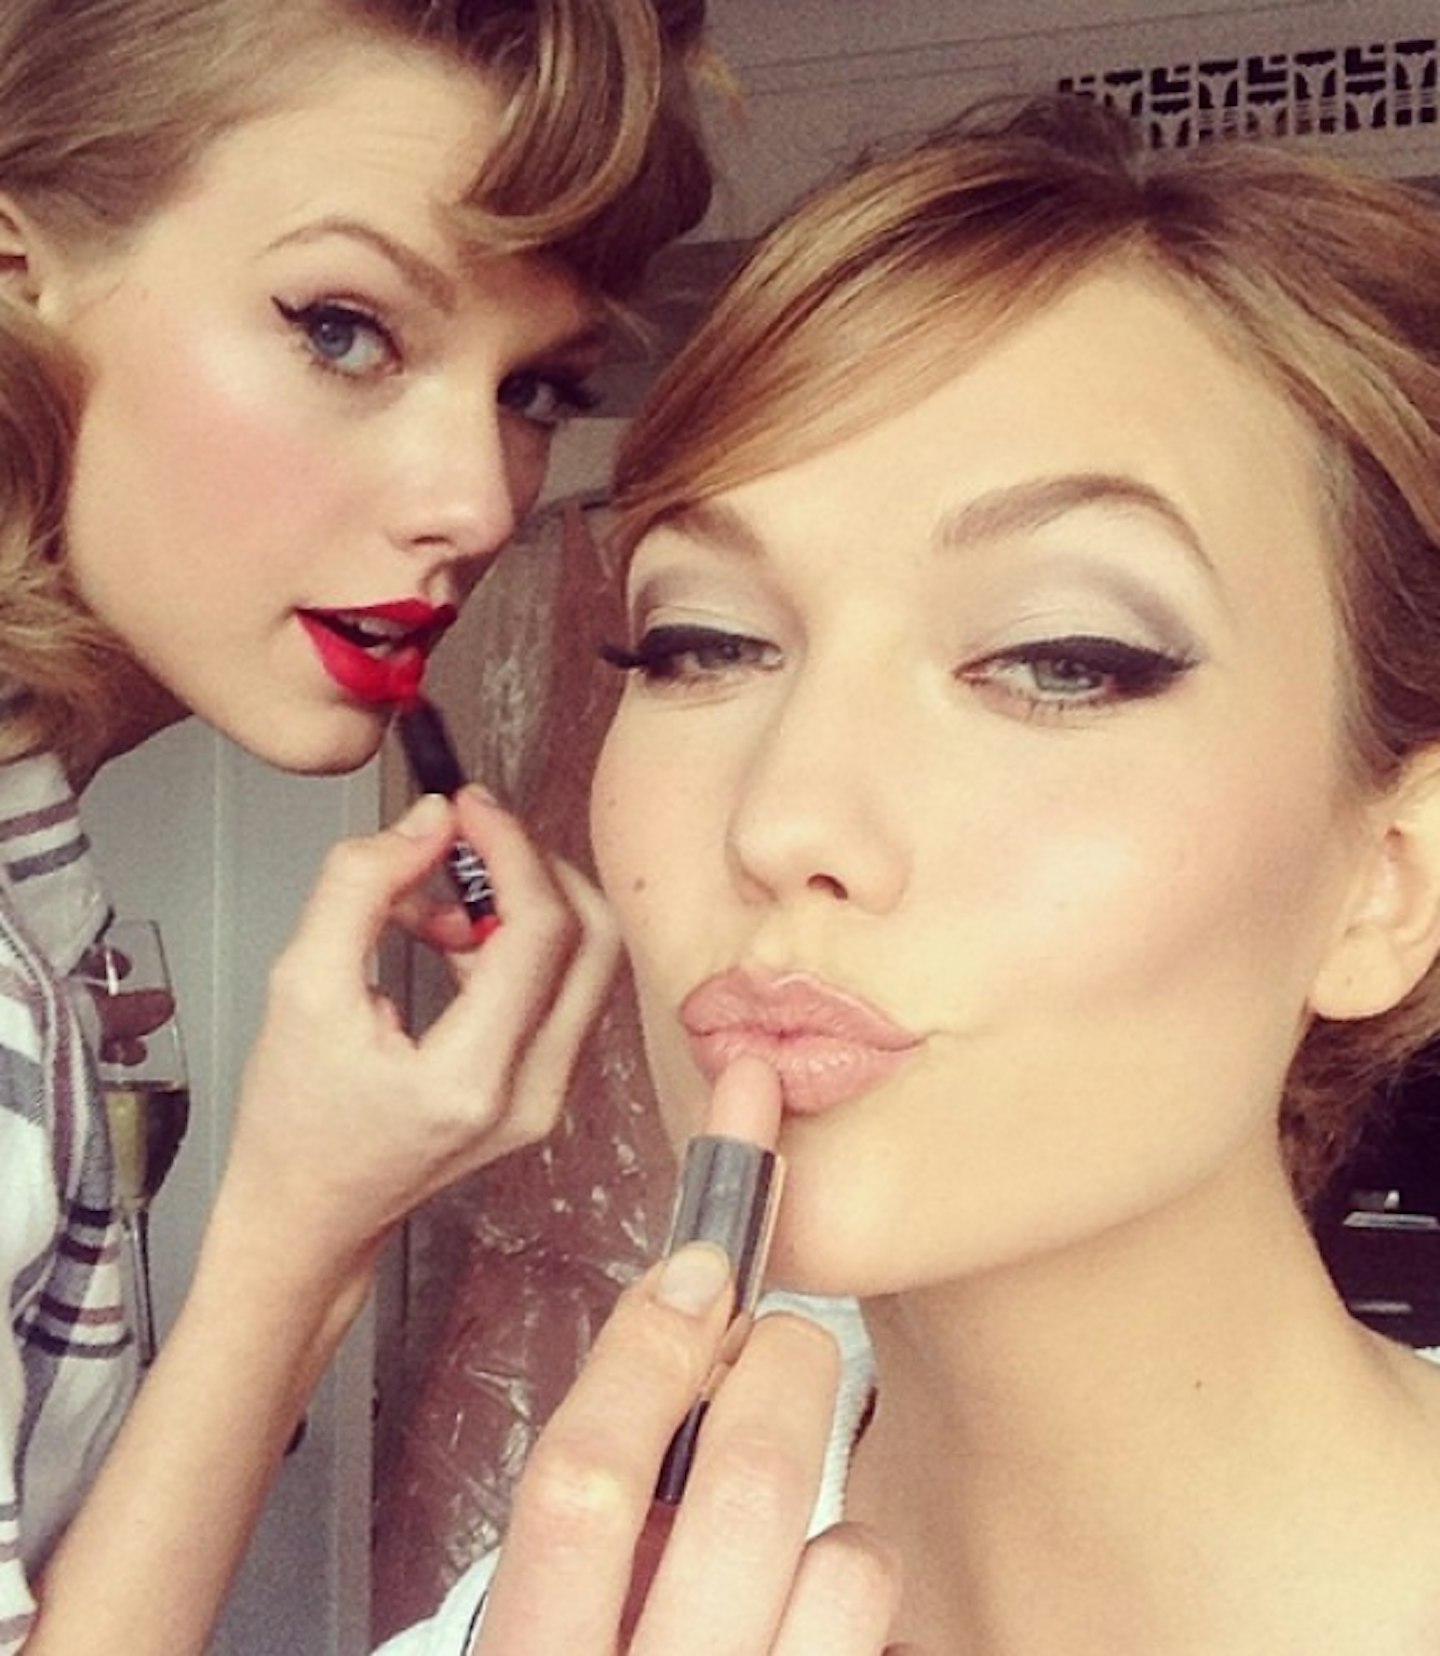 She's best friends with actual supermodles (that's Karlie Kloss FYI)